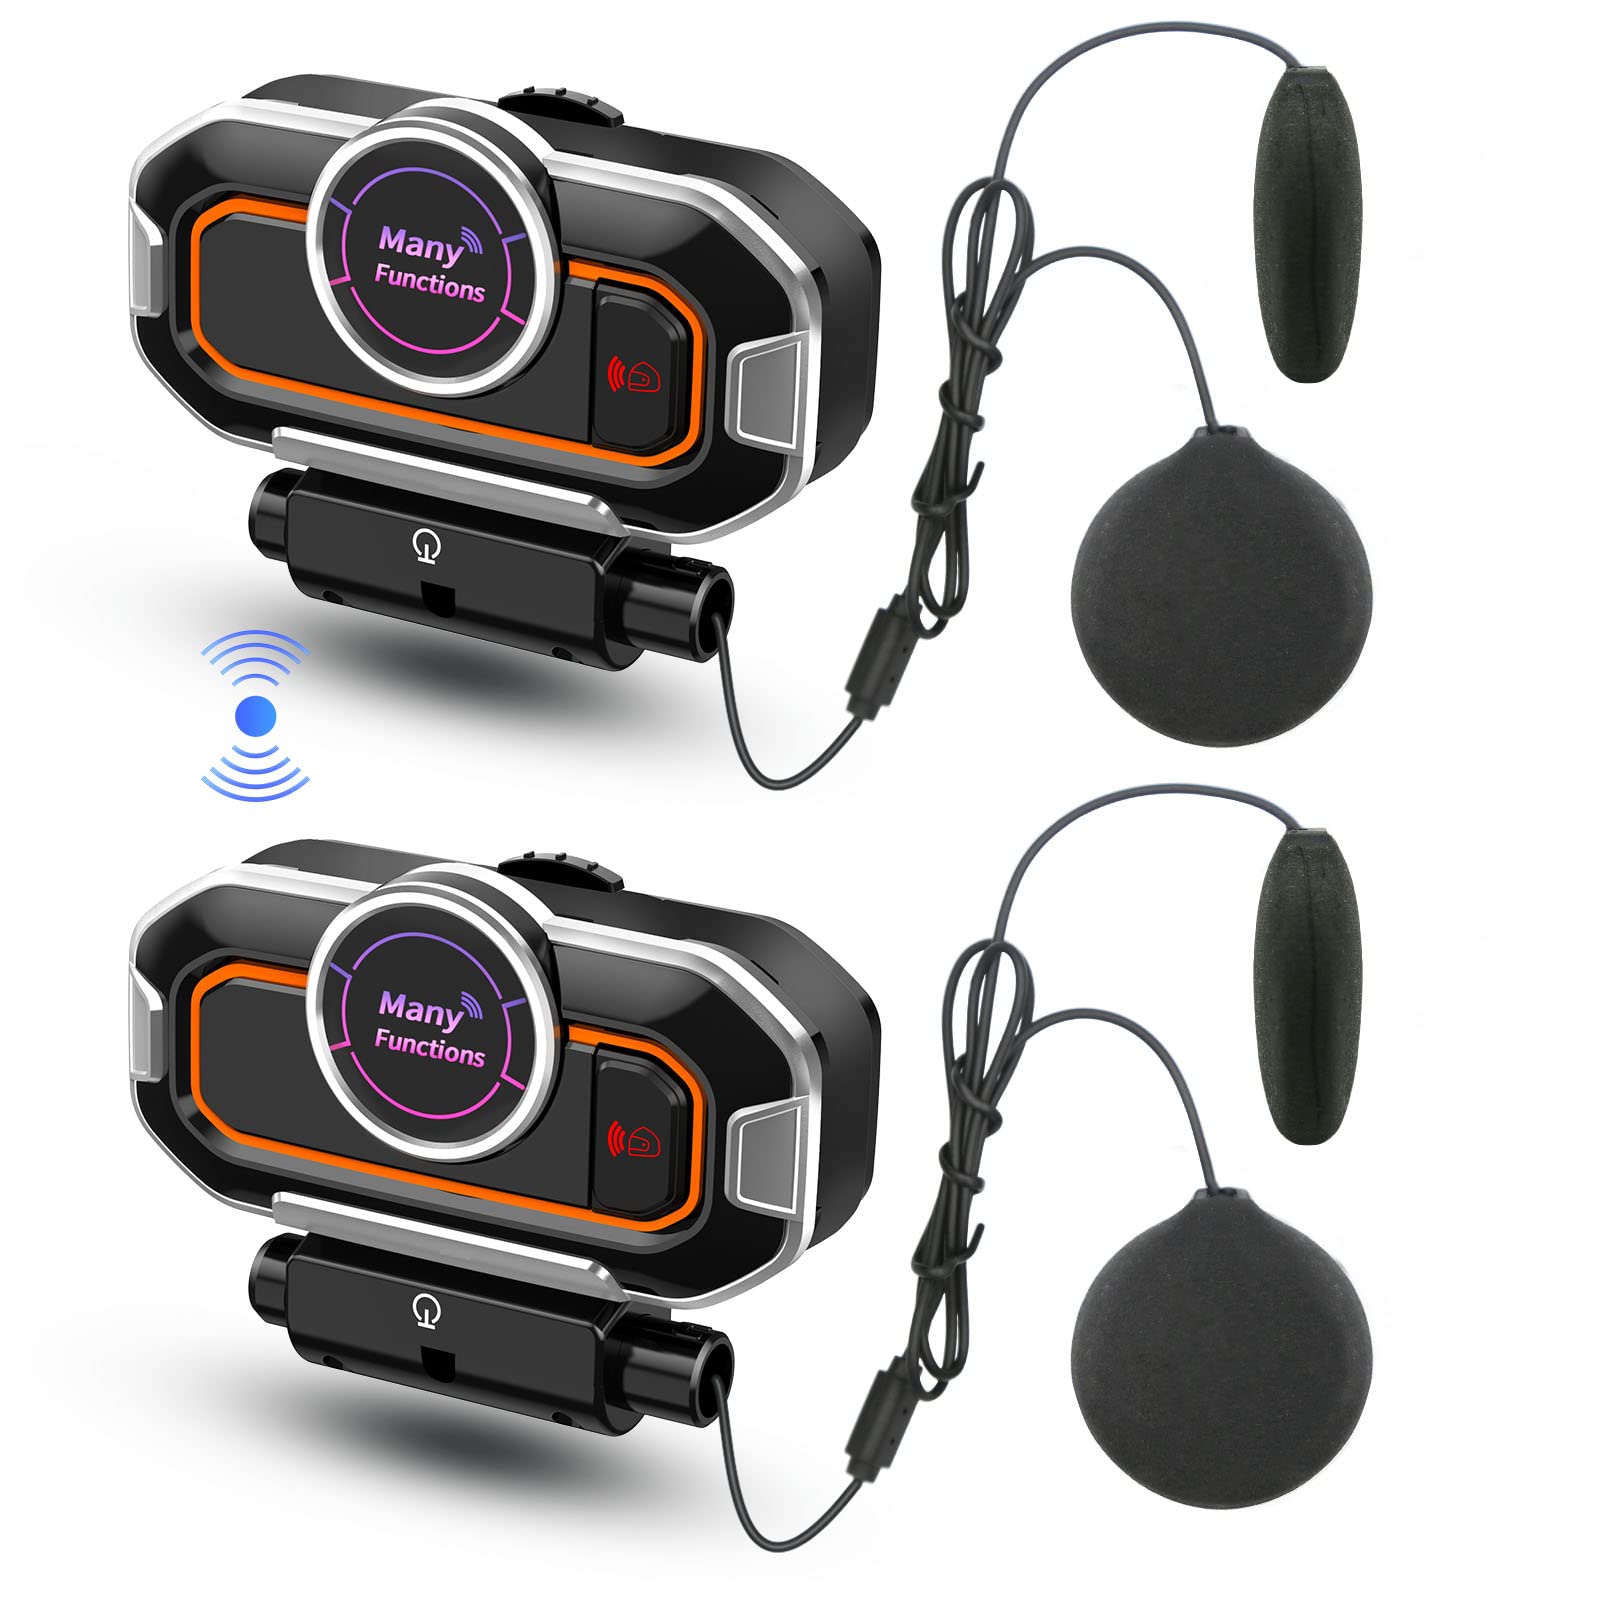 3T6B V9 Pro 2 Host Interconnection Motorcycle Bluetooth Headset with Music Sharing, IP54 Waterproof Helmet Intercom Headphones System with FM Radio/Noise Cancellation